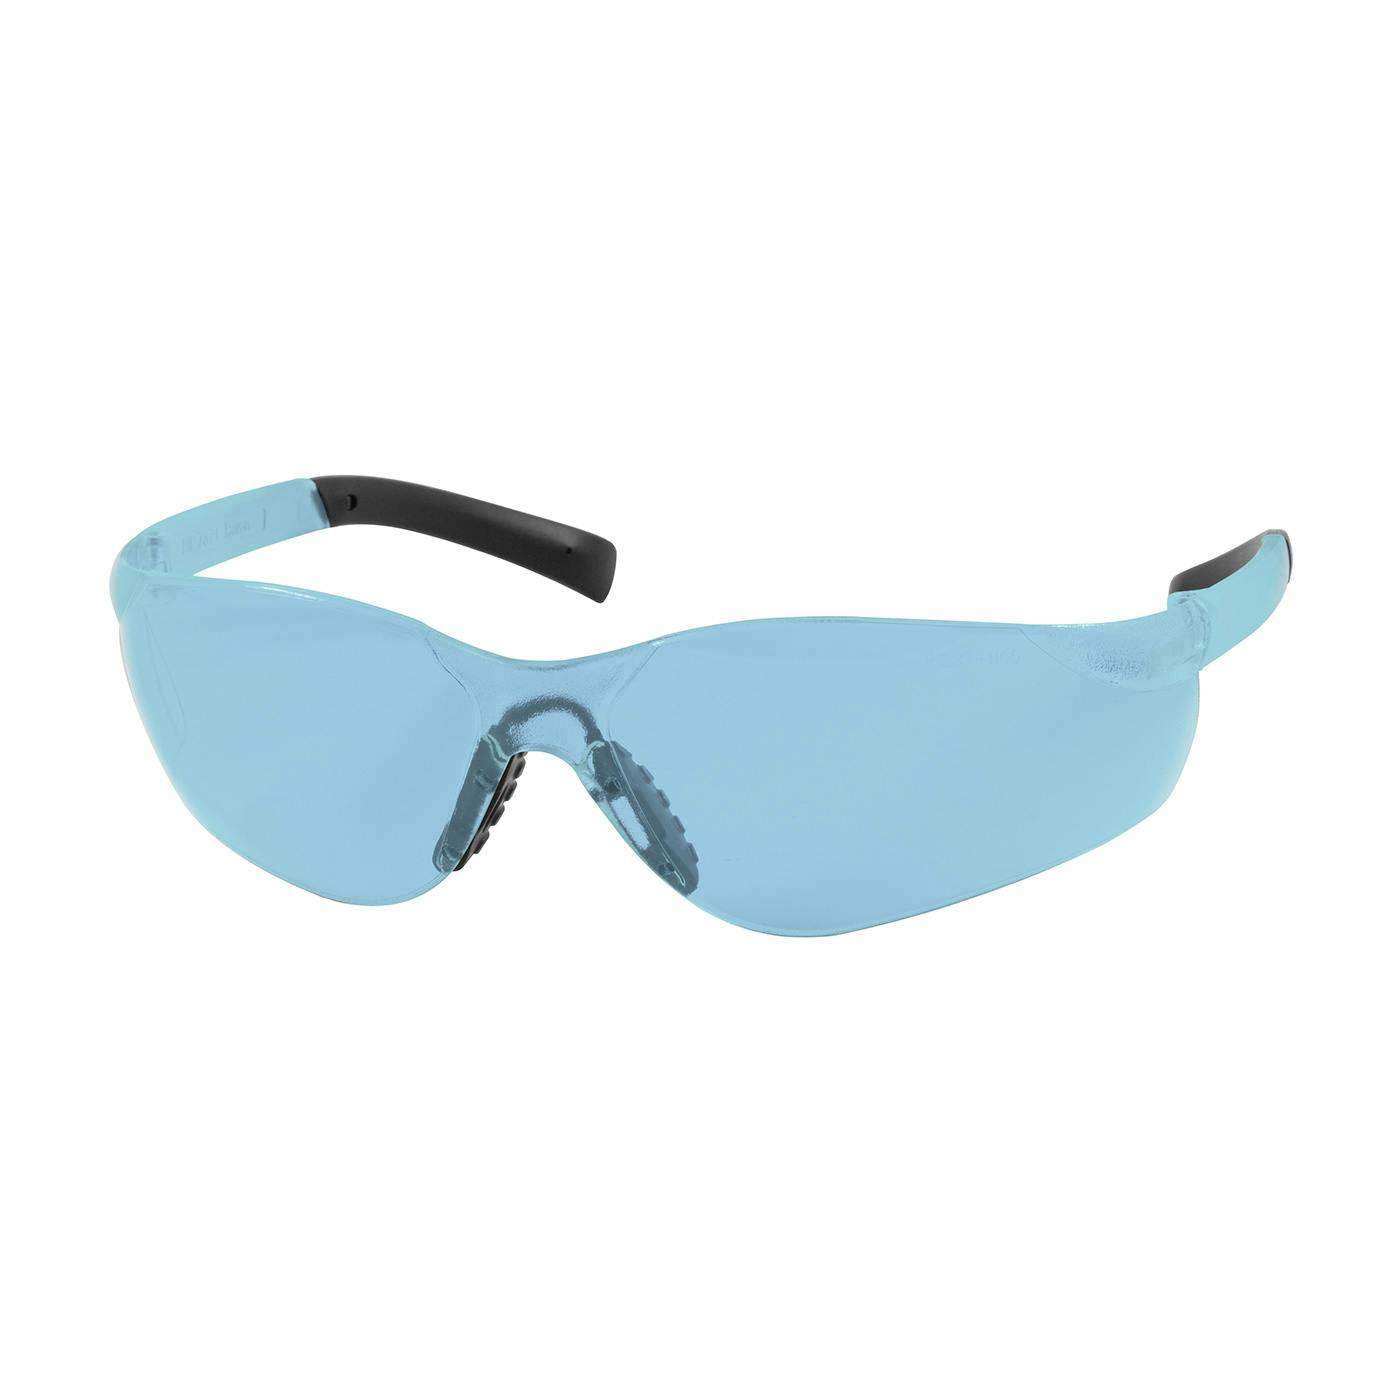 Rimless Safety Glasses with Light Blue Temple, Light Blue Lens and Anti-Scratch Coating, Light Blue (250-08-5503) - OS